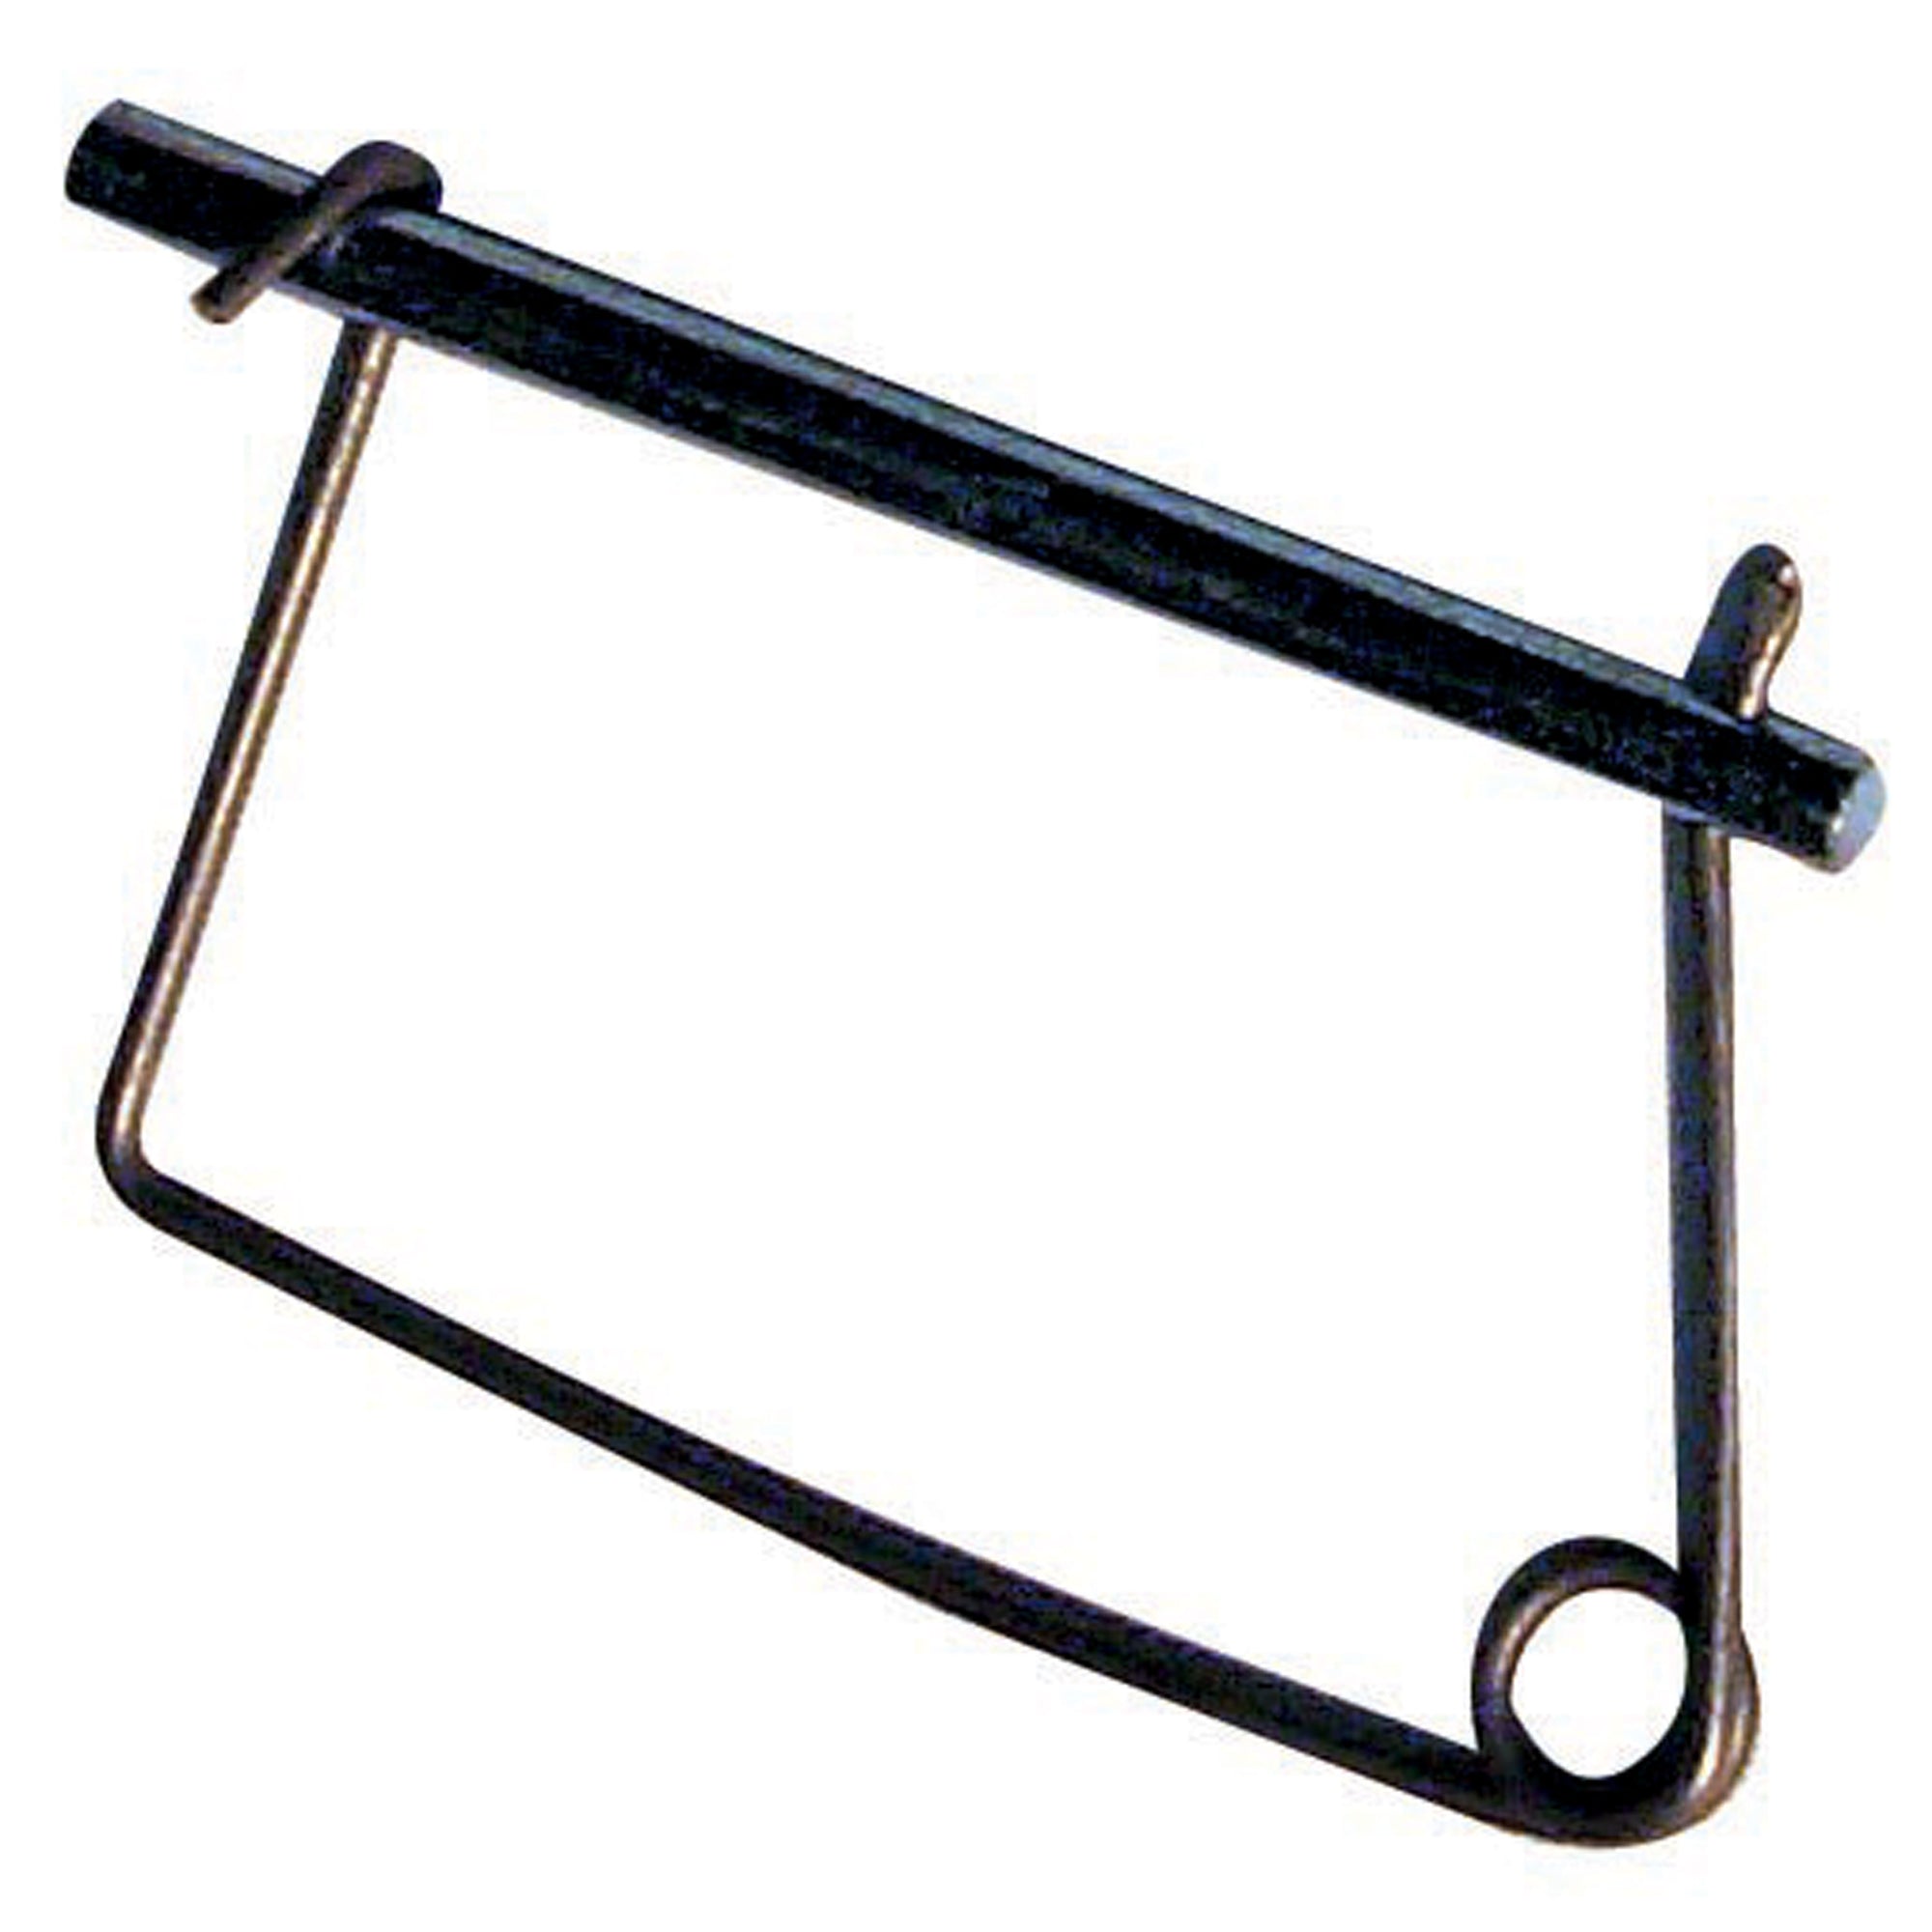 JR Products 01164 Awning Locking Pin - Pack of 2